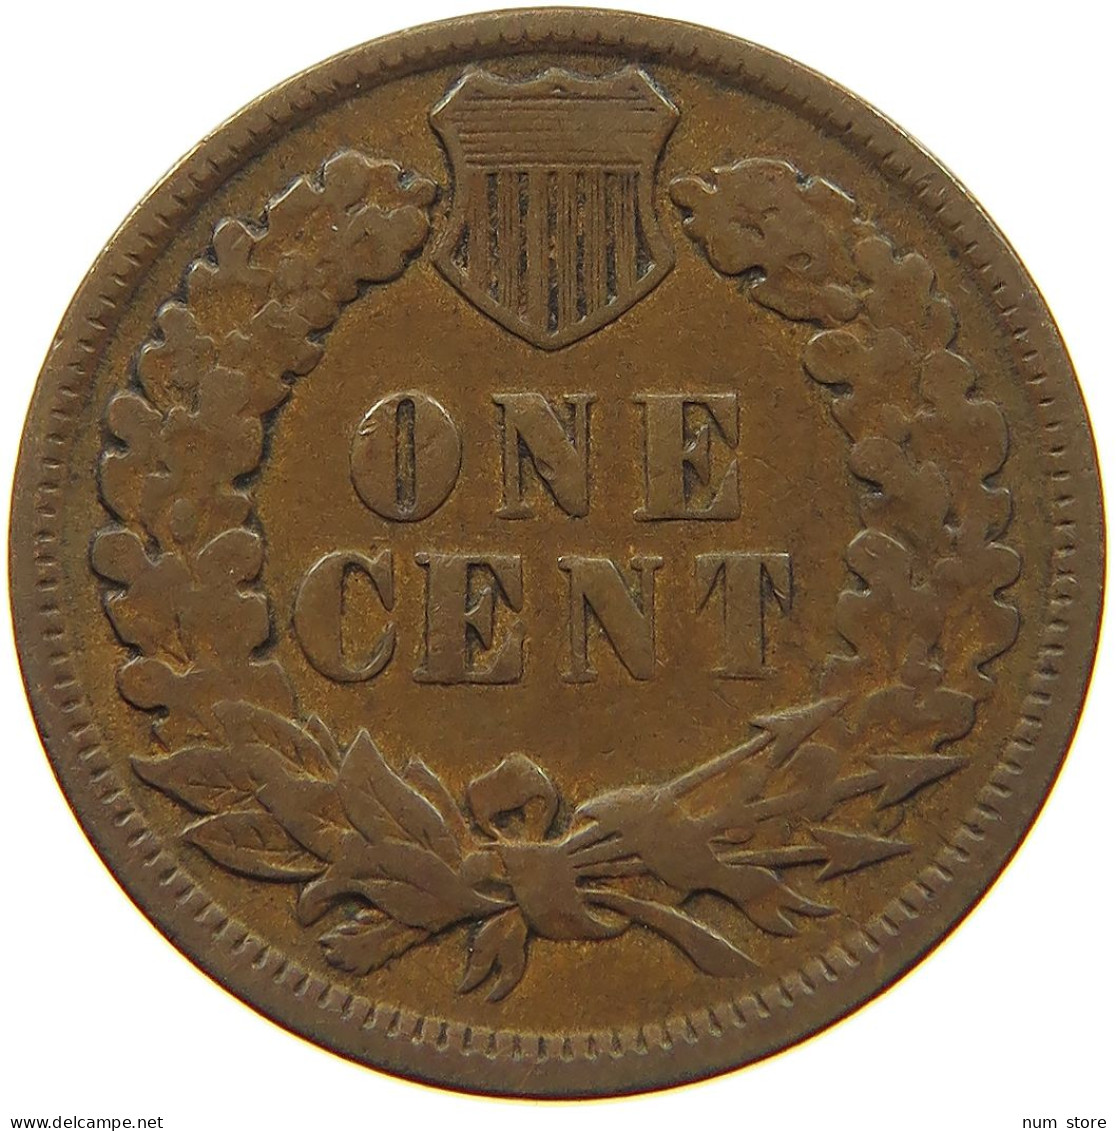 UNITED STATES OF AMERICA CENT 1889 INDIAN HEAD #c082 0261 - 1859-1909: Indian Head